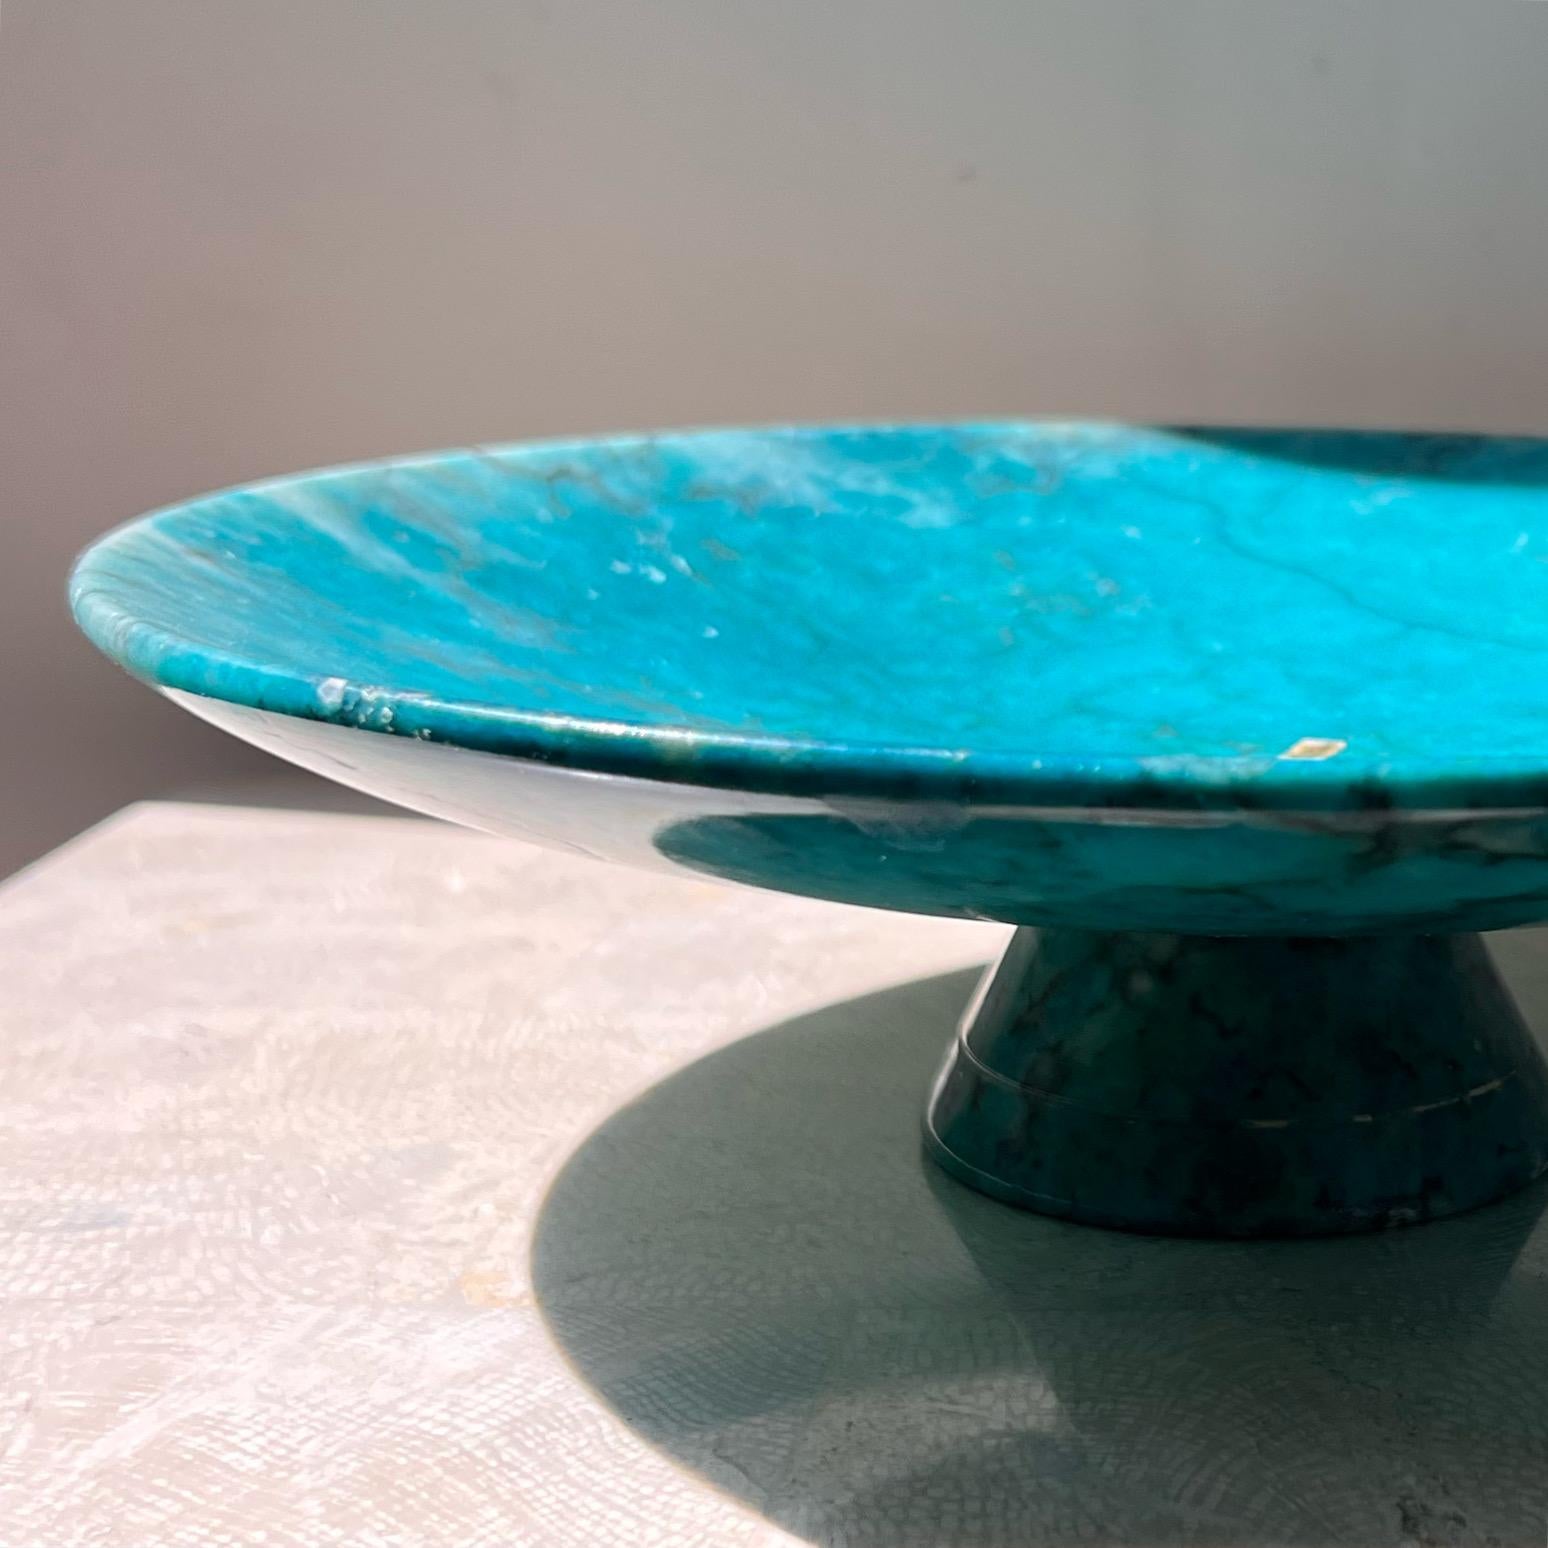 A vintage Italian marble platter / fruit bowl / centerpiece in a stunning turquoise blue, circa 1960s. Note the conical shape of the base, lending a decidedly postmodern sensibility to the piece. Original “made in Italy” sticker still intact. Good